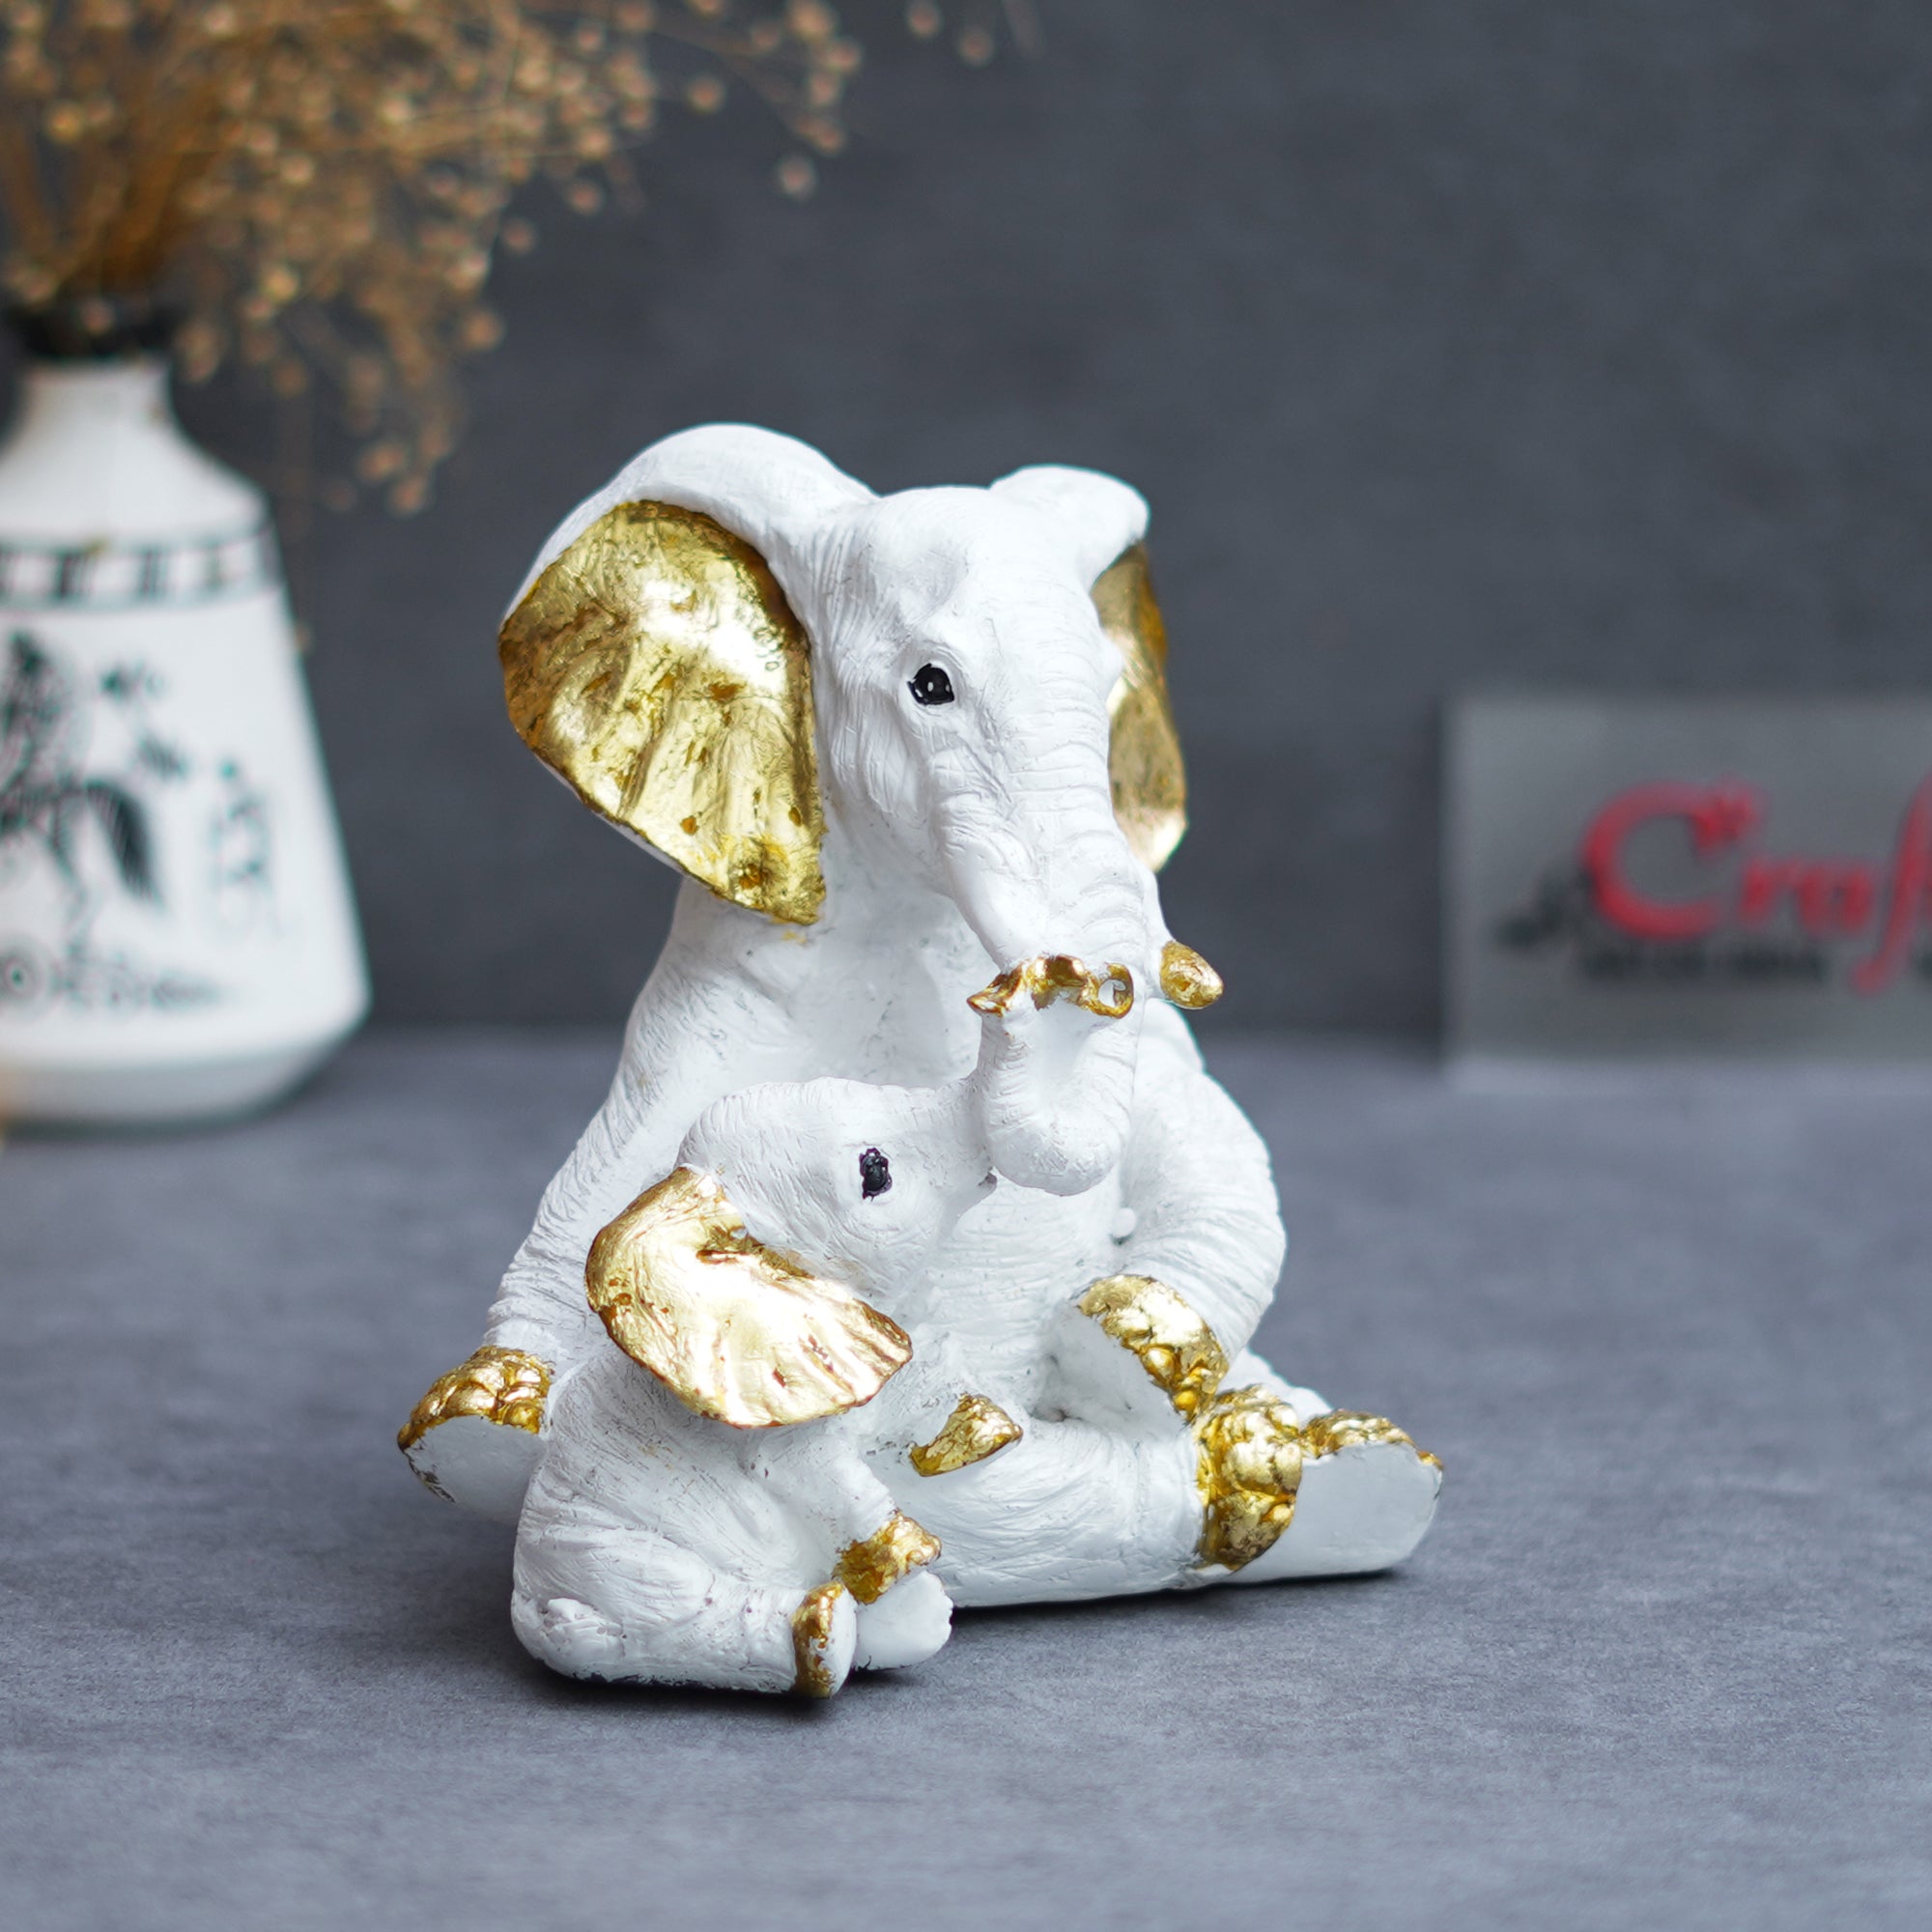 White Polyresin Small Elephant Family Mom and Baby Statue Animal Figurines Decorative Showpiece for Home Decor 4